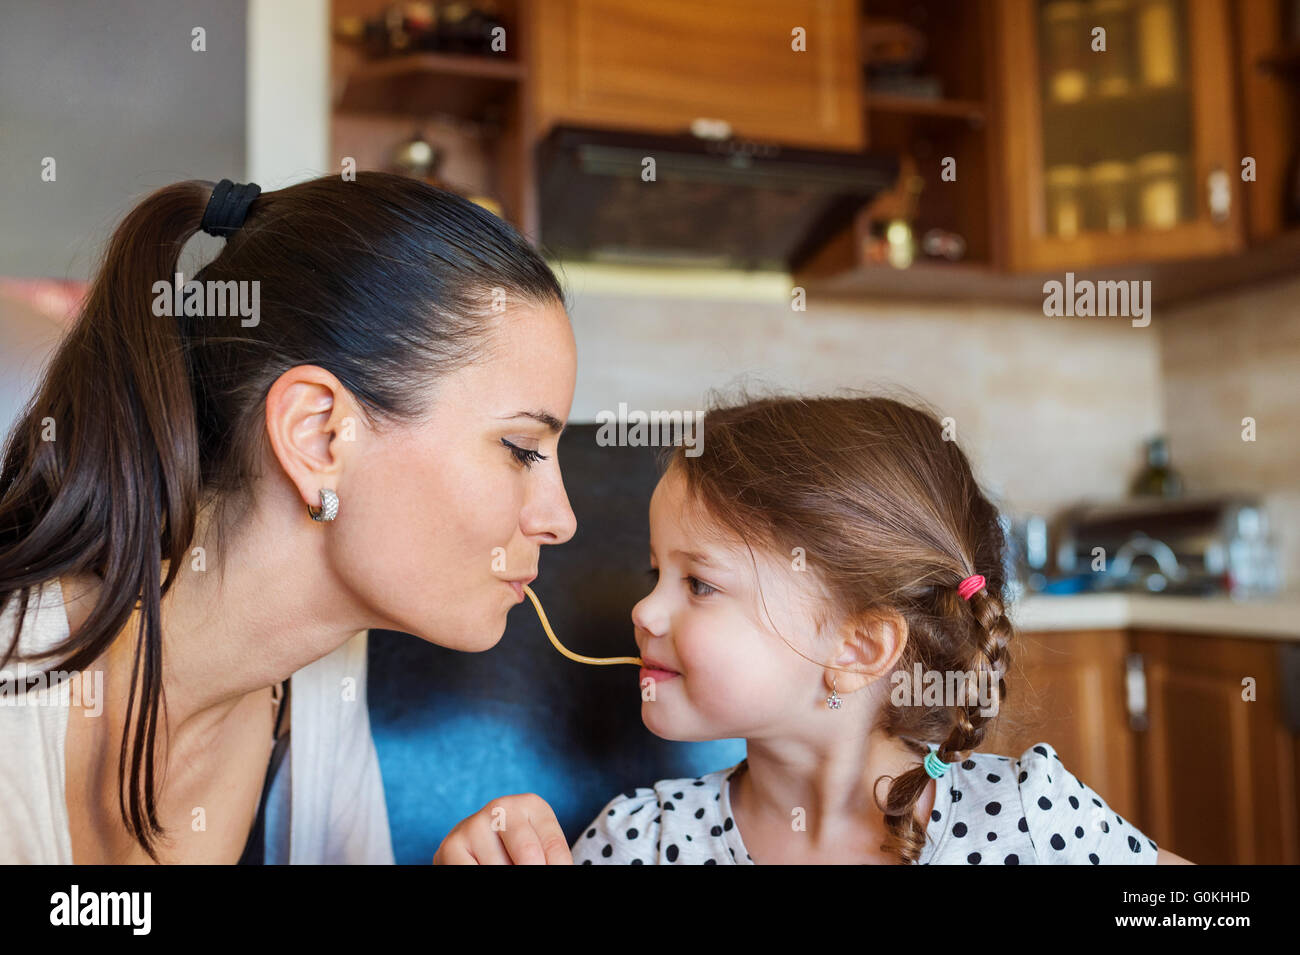 Mother and daughter in the kitchen, eating spaghetti together Stock Photo